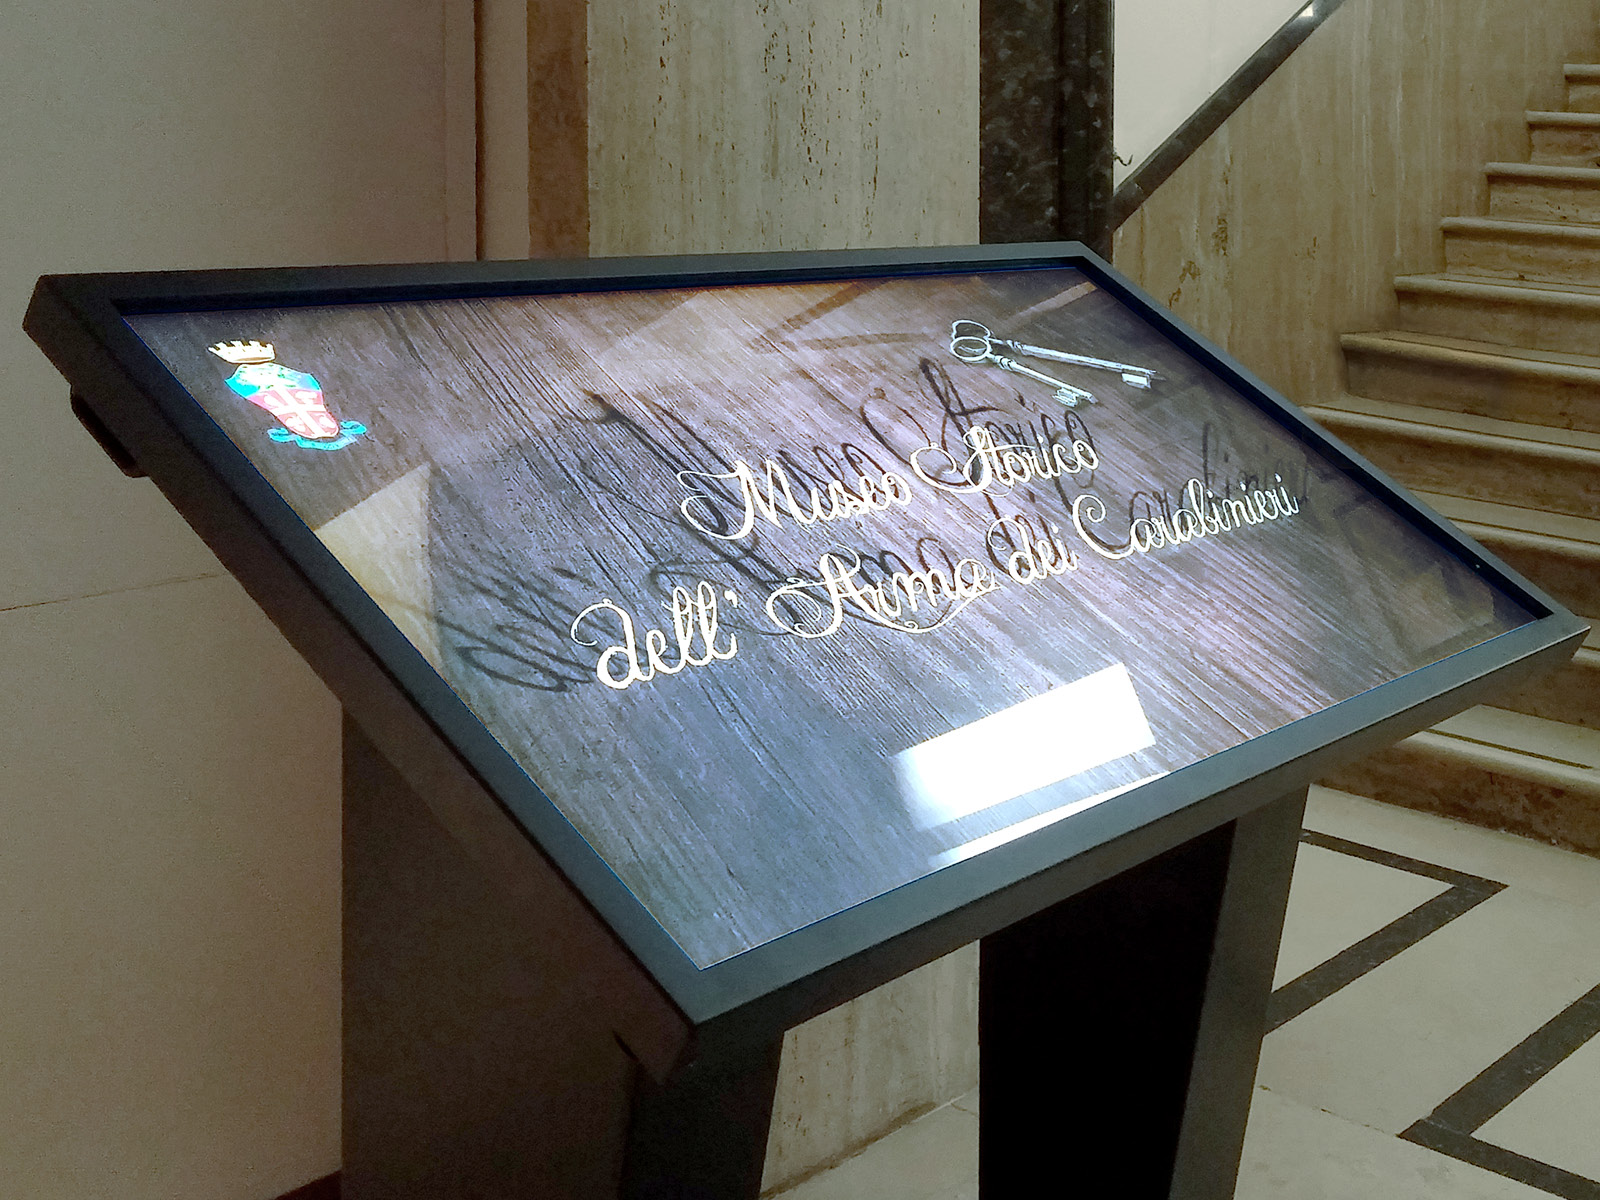 Touchwindow - An interactive thematic pathway for recounting the history of Italy